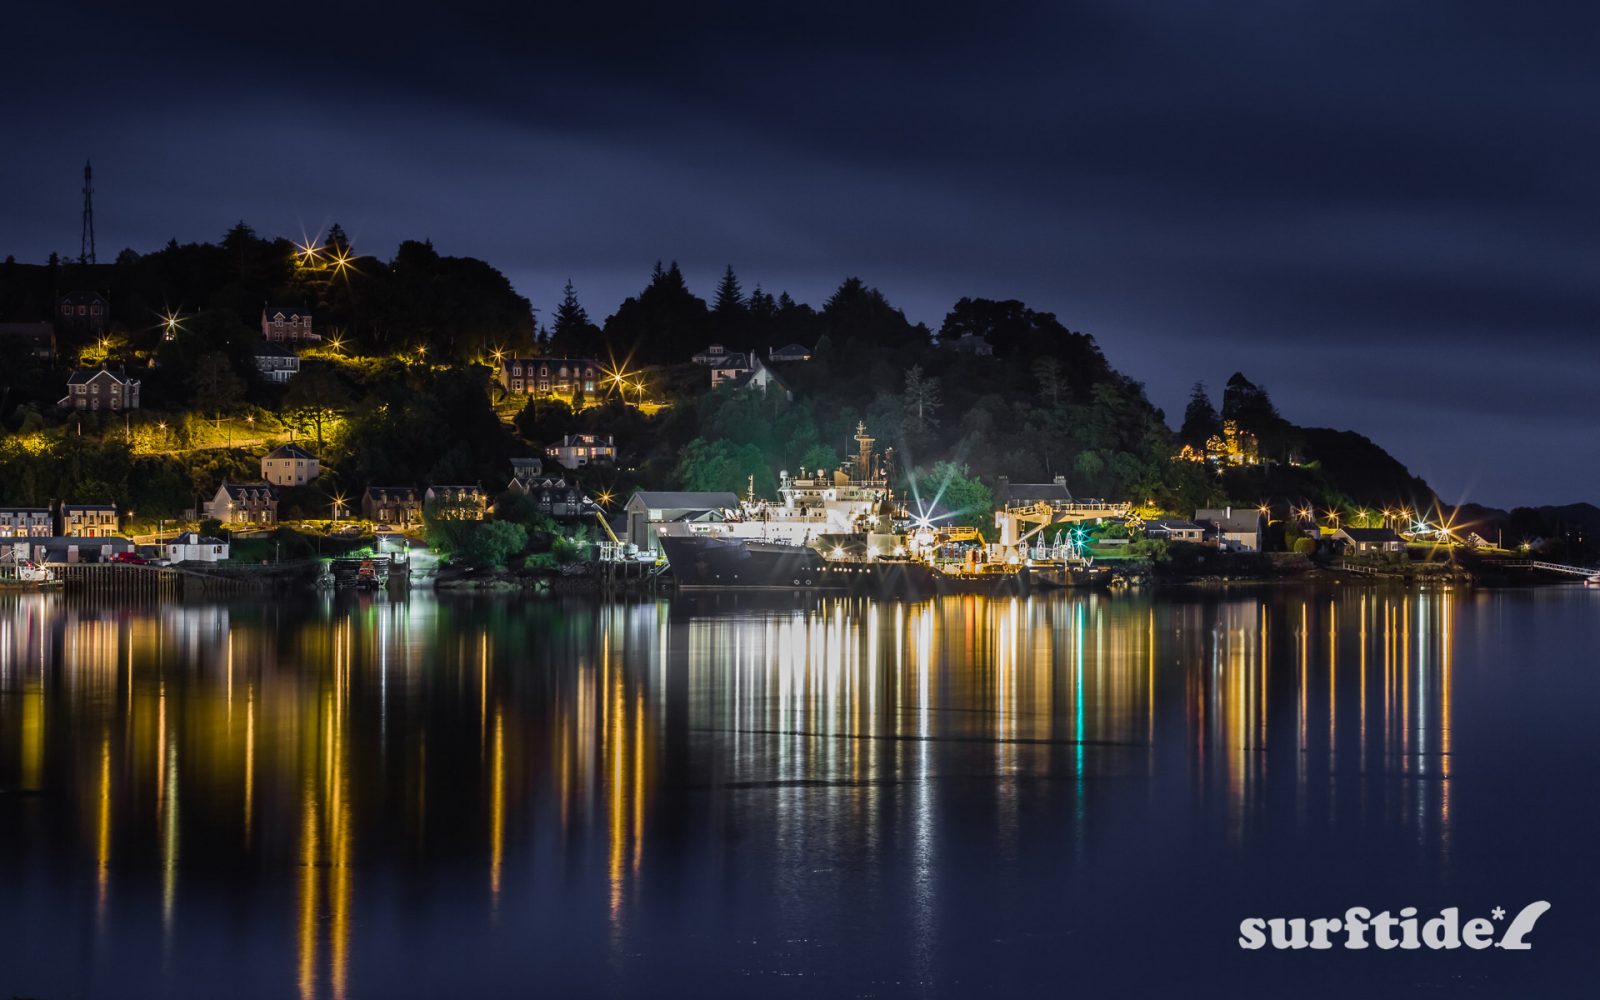 Long exposure night photo of boats and light reflecting off the water in Oban harbour, Scotland